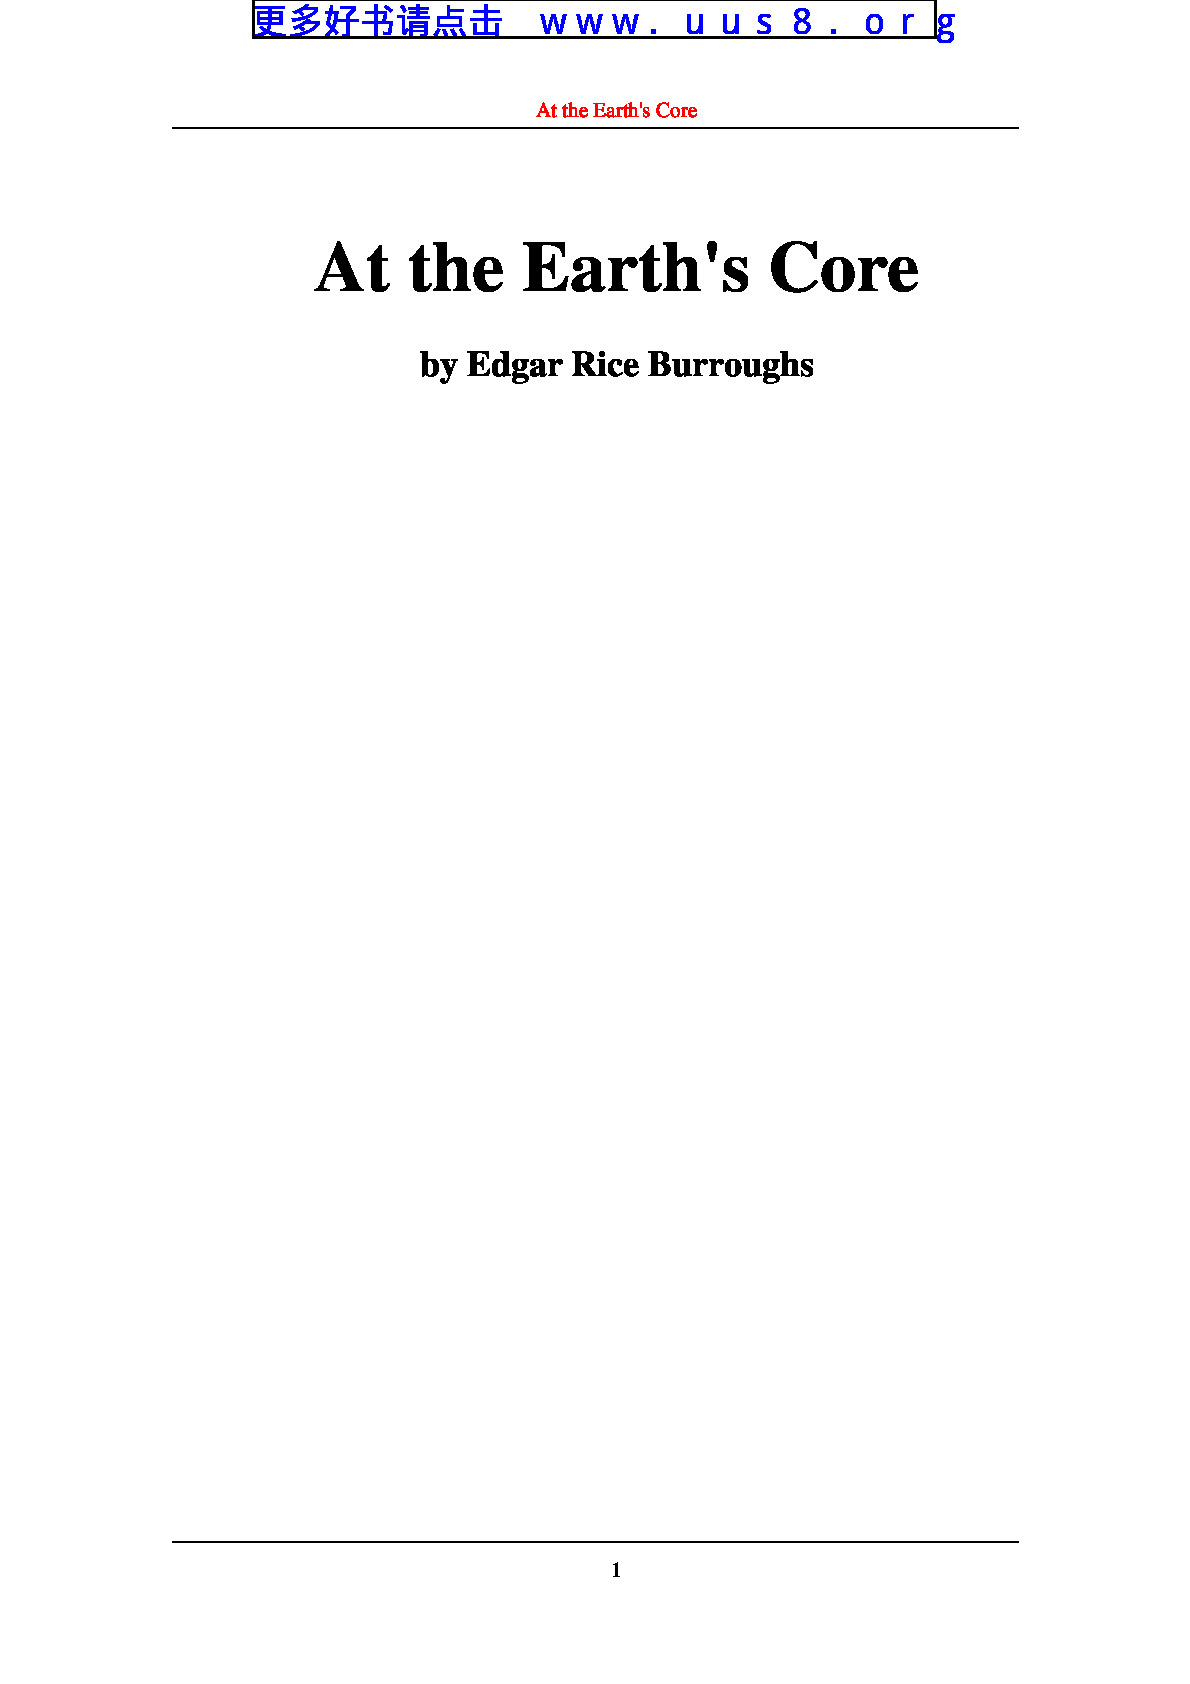 At_the_Earth’s_Core(地心)